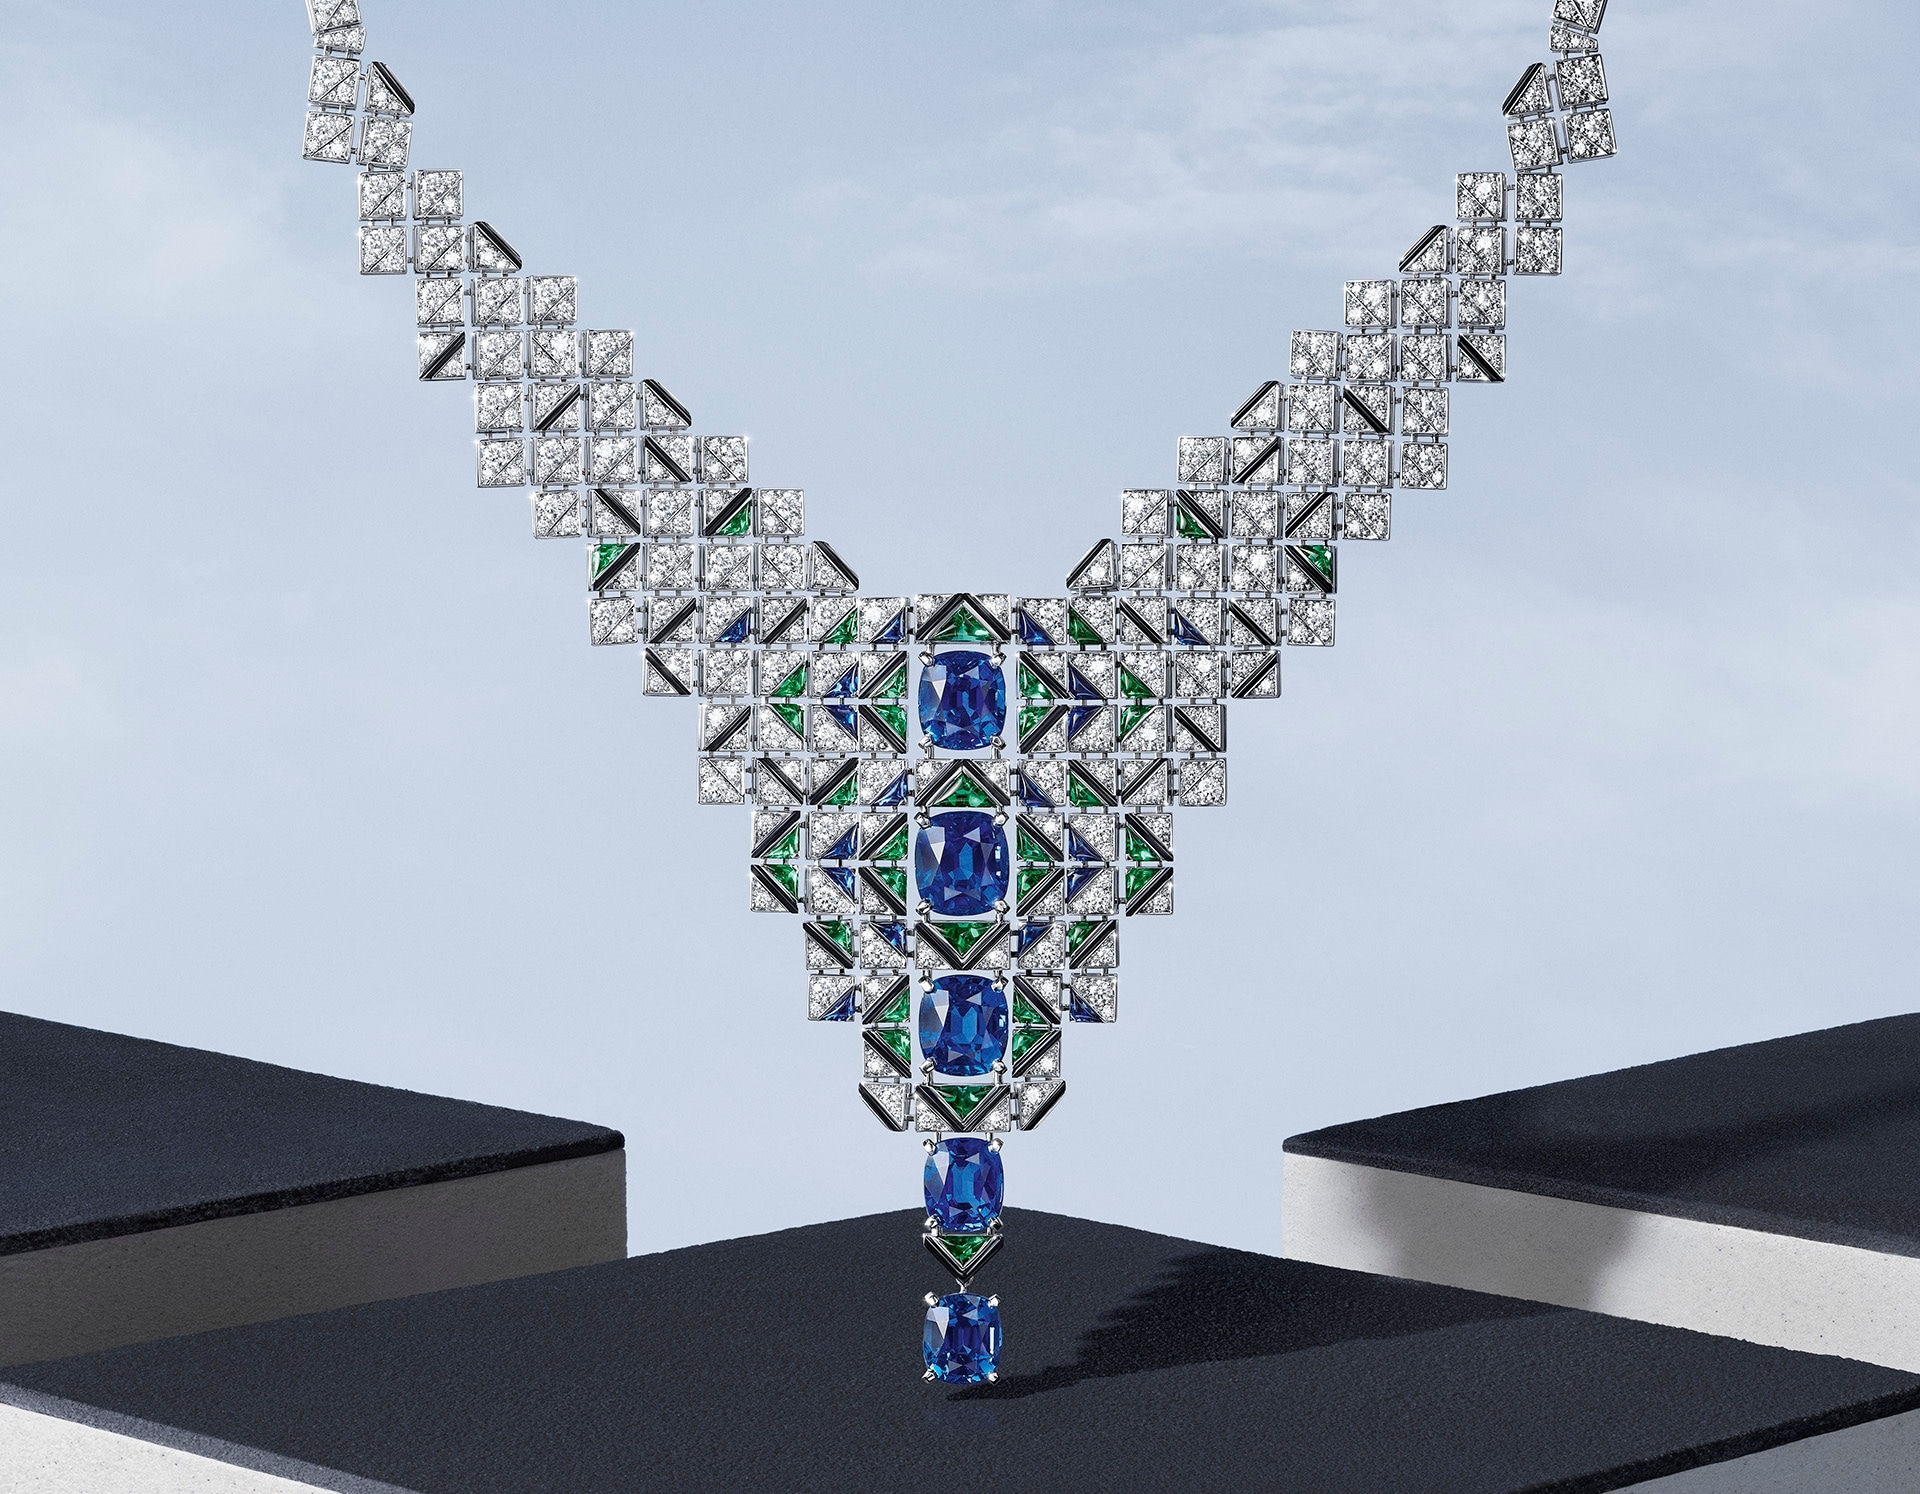 The sublime shapes of the high jewellery pieces by Cartier